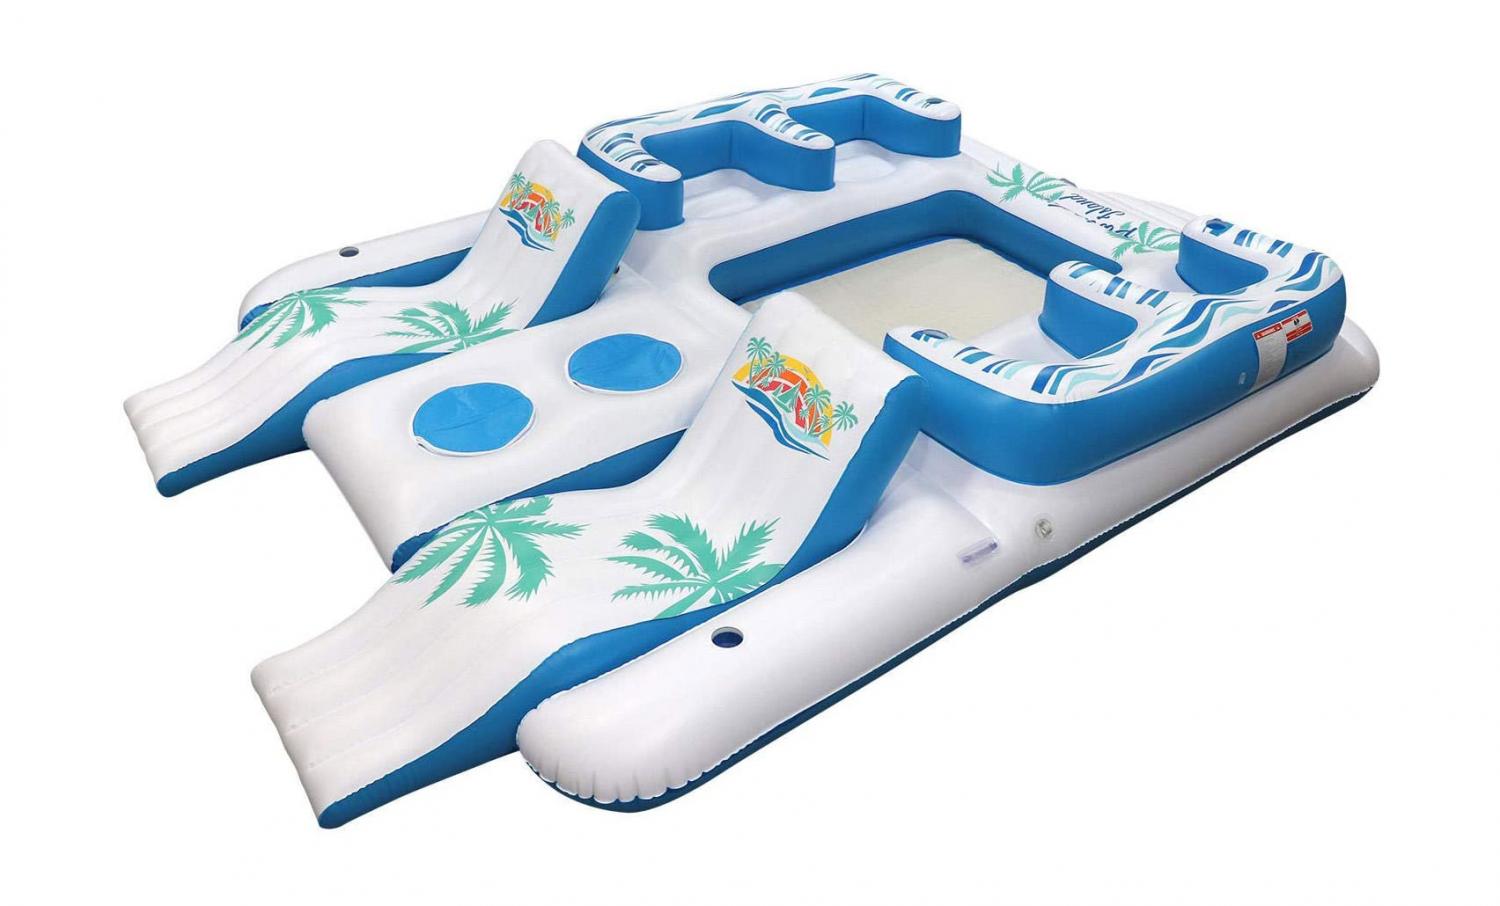 Giant 7-Person Tropical Island Lake Float